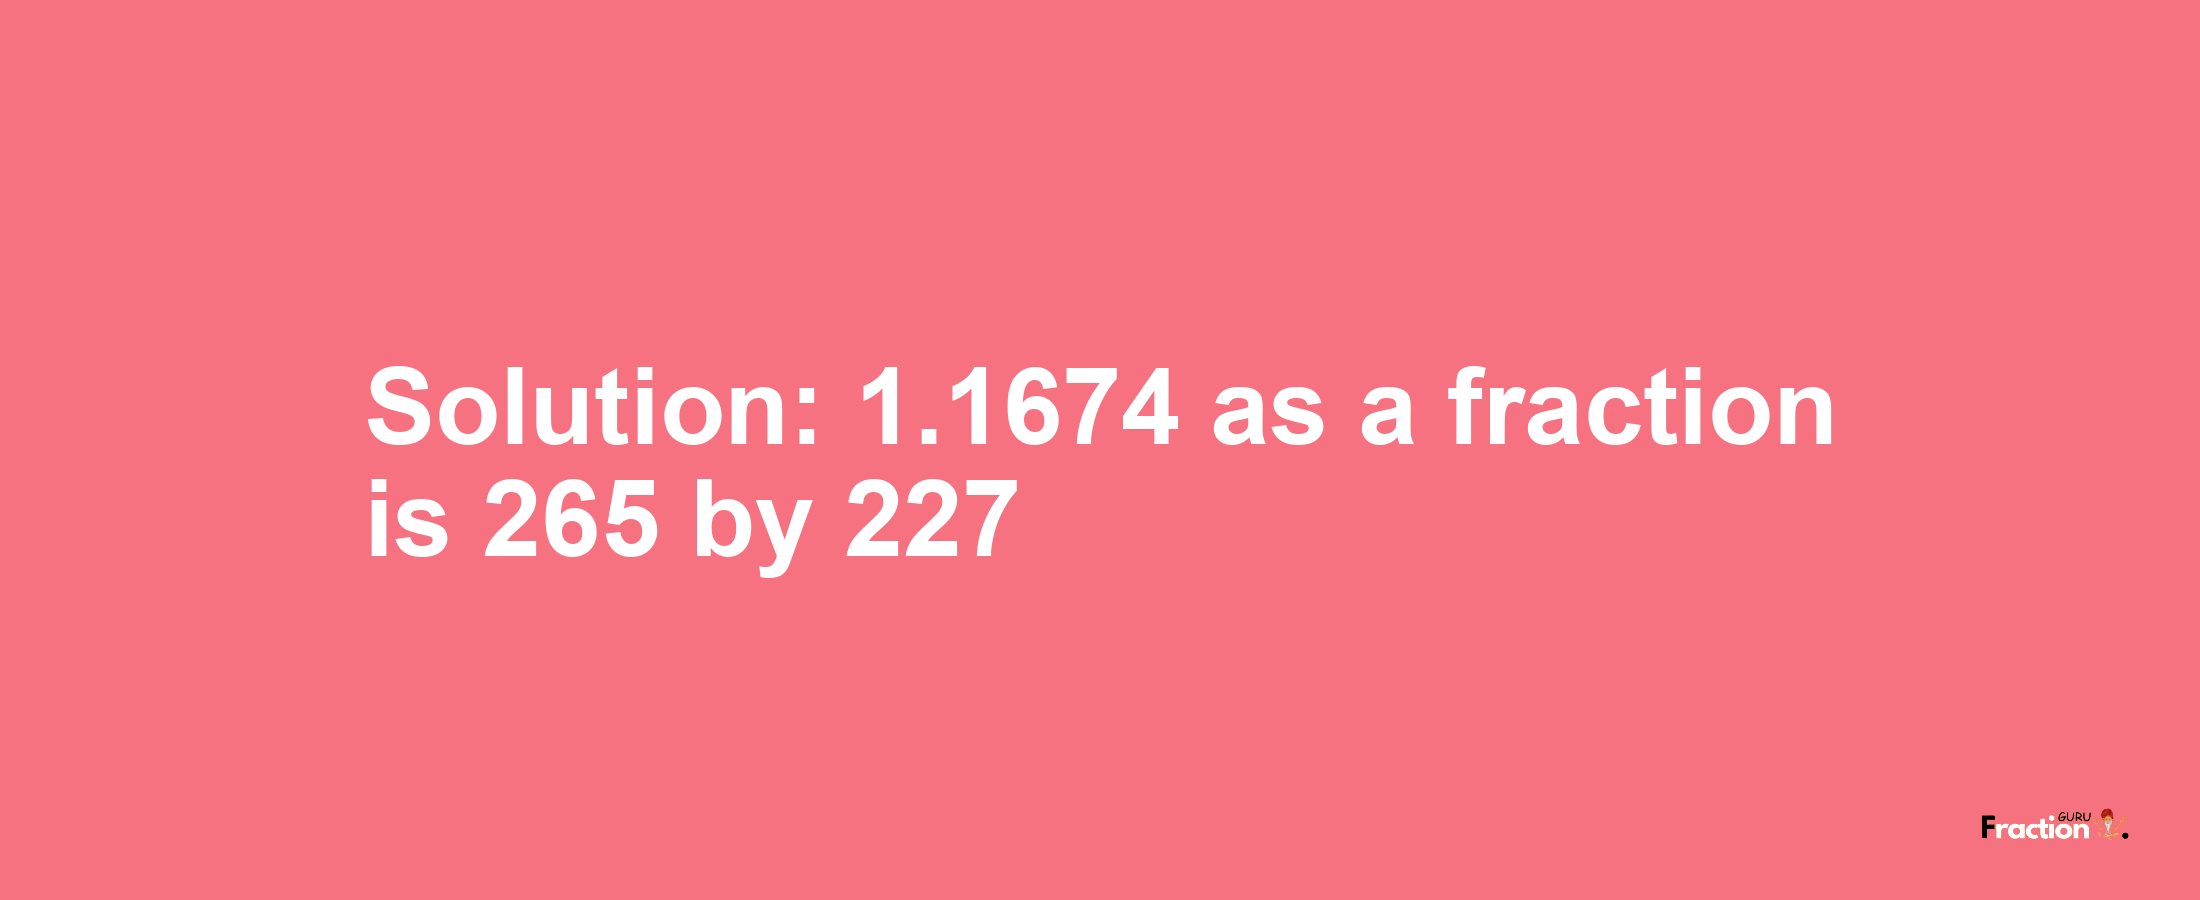 Solution:1.1674 as a fraction is 265/227